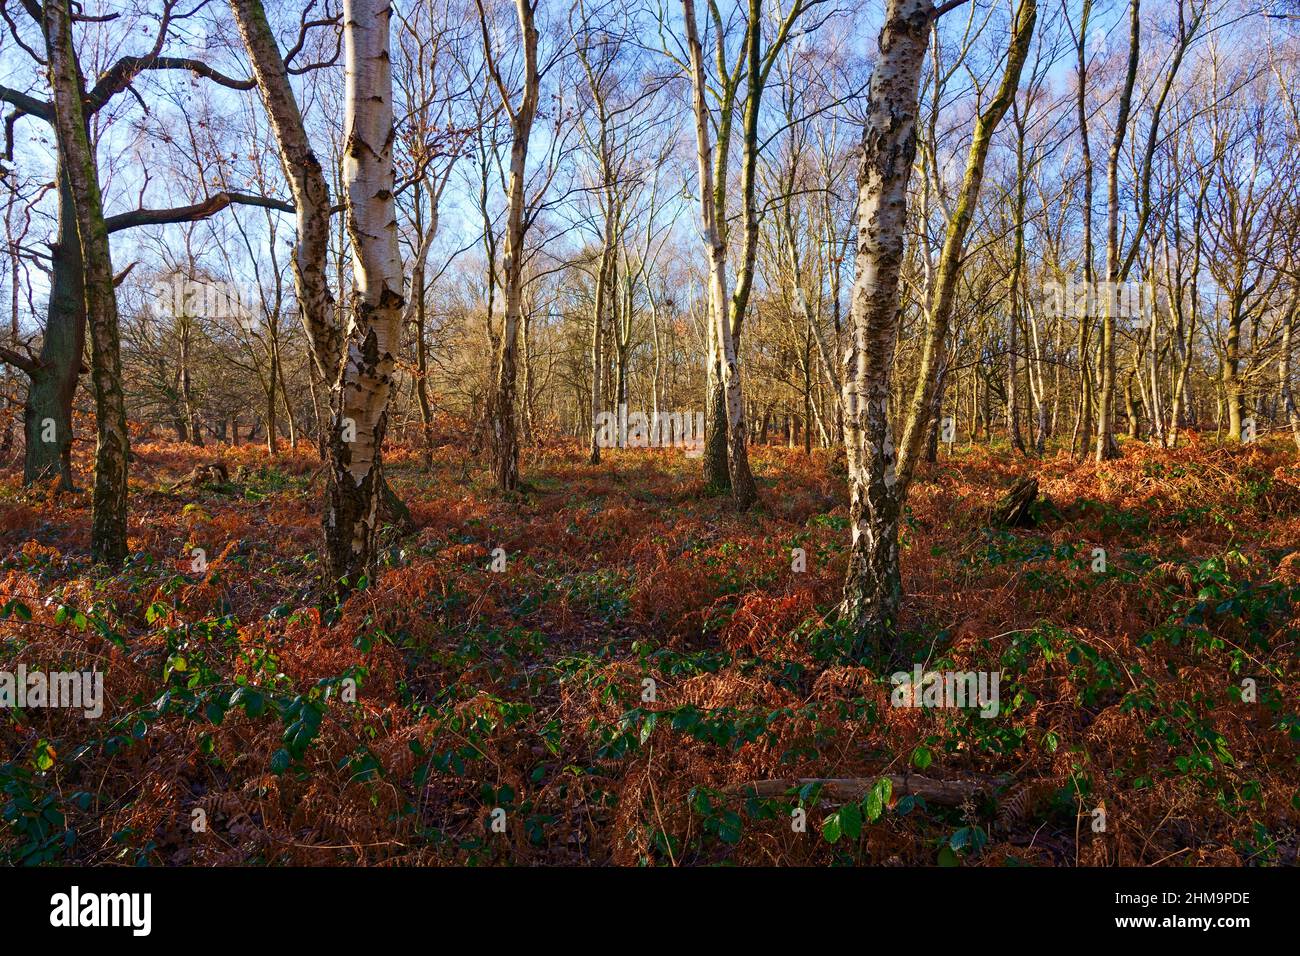 Tall, thin trees surrounded by bracken and brambles on a bright winter morning in Sherwood Forest Stock Photo